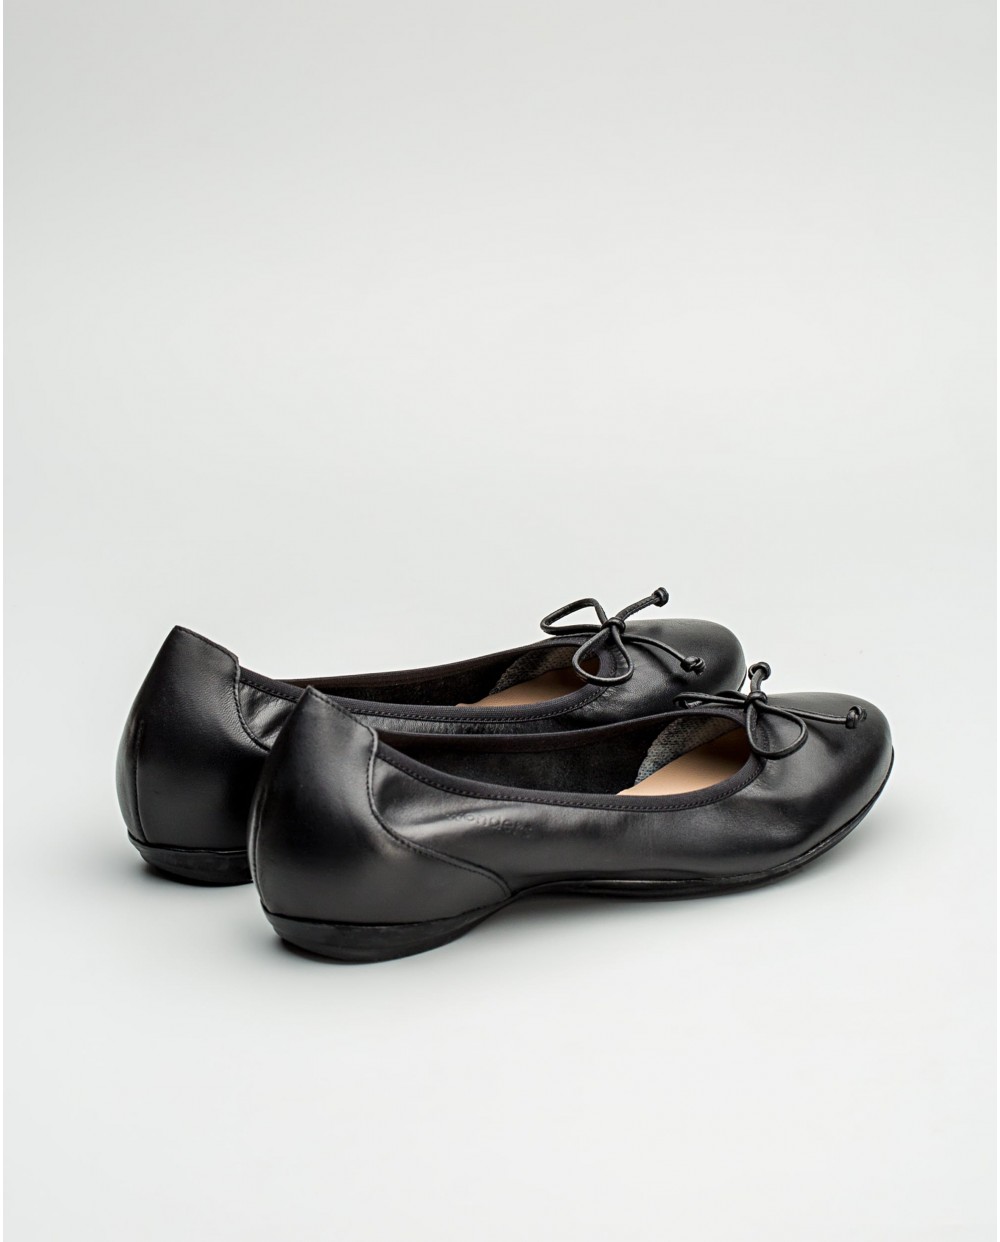 Wonders-Flat Shoes-Leather ballet pump with bow